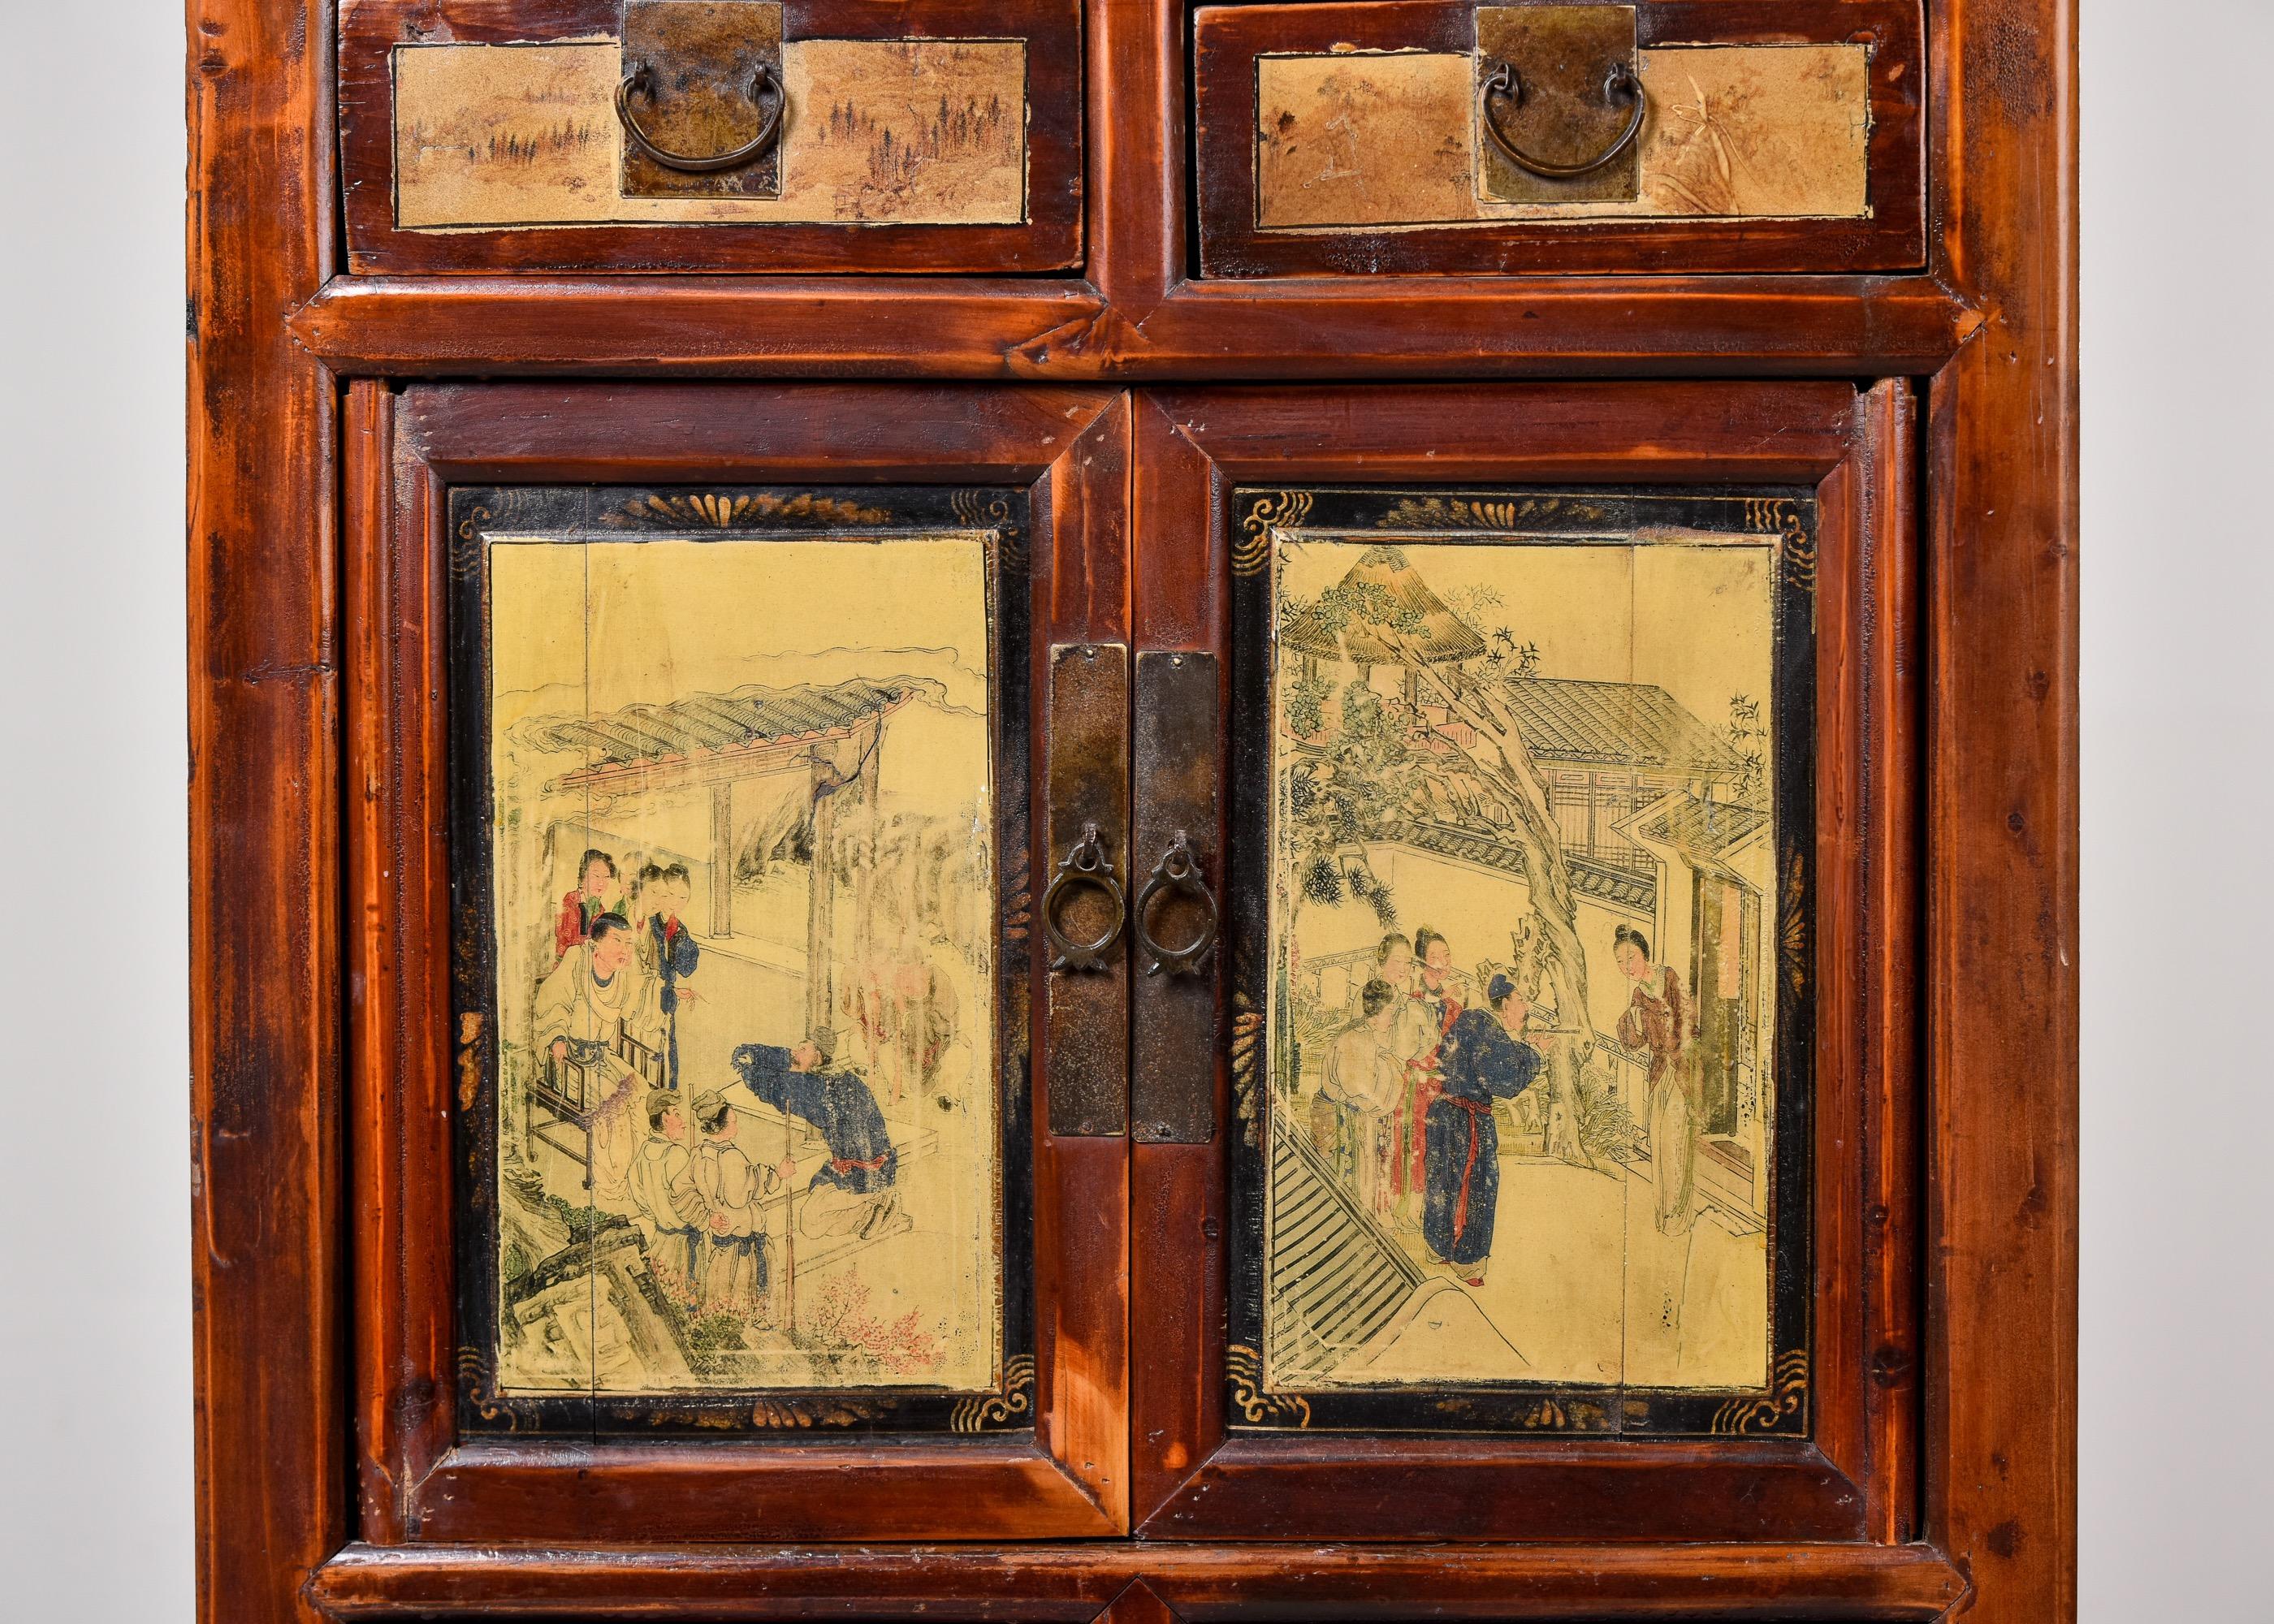 Chinese Export Early 20th C Tall Narrow Chinese Cabinet with Painted Opera Scenes For Sale